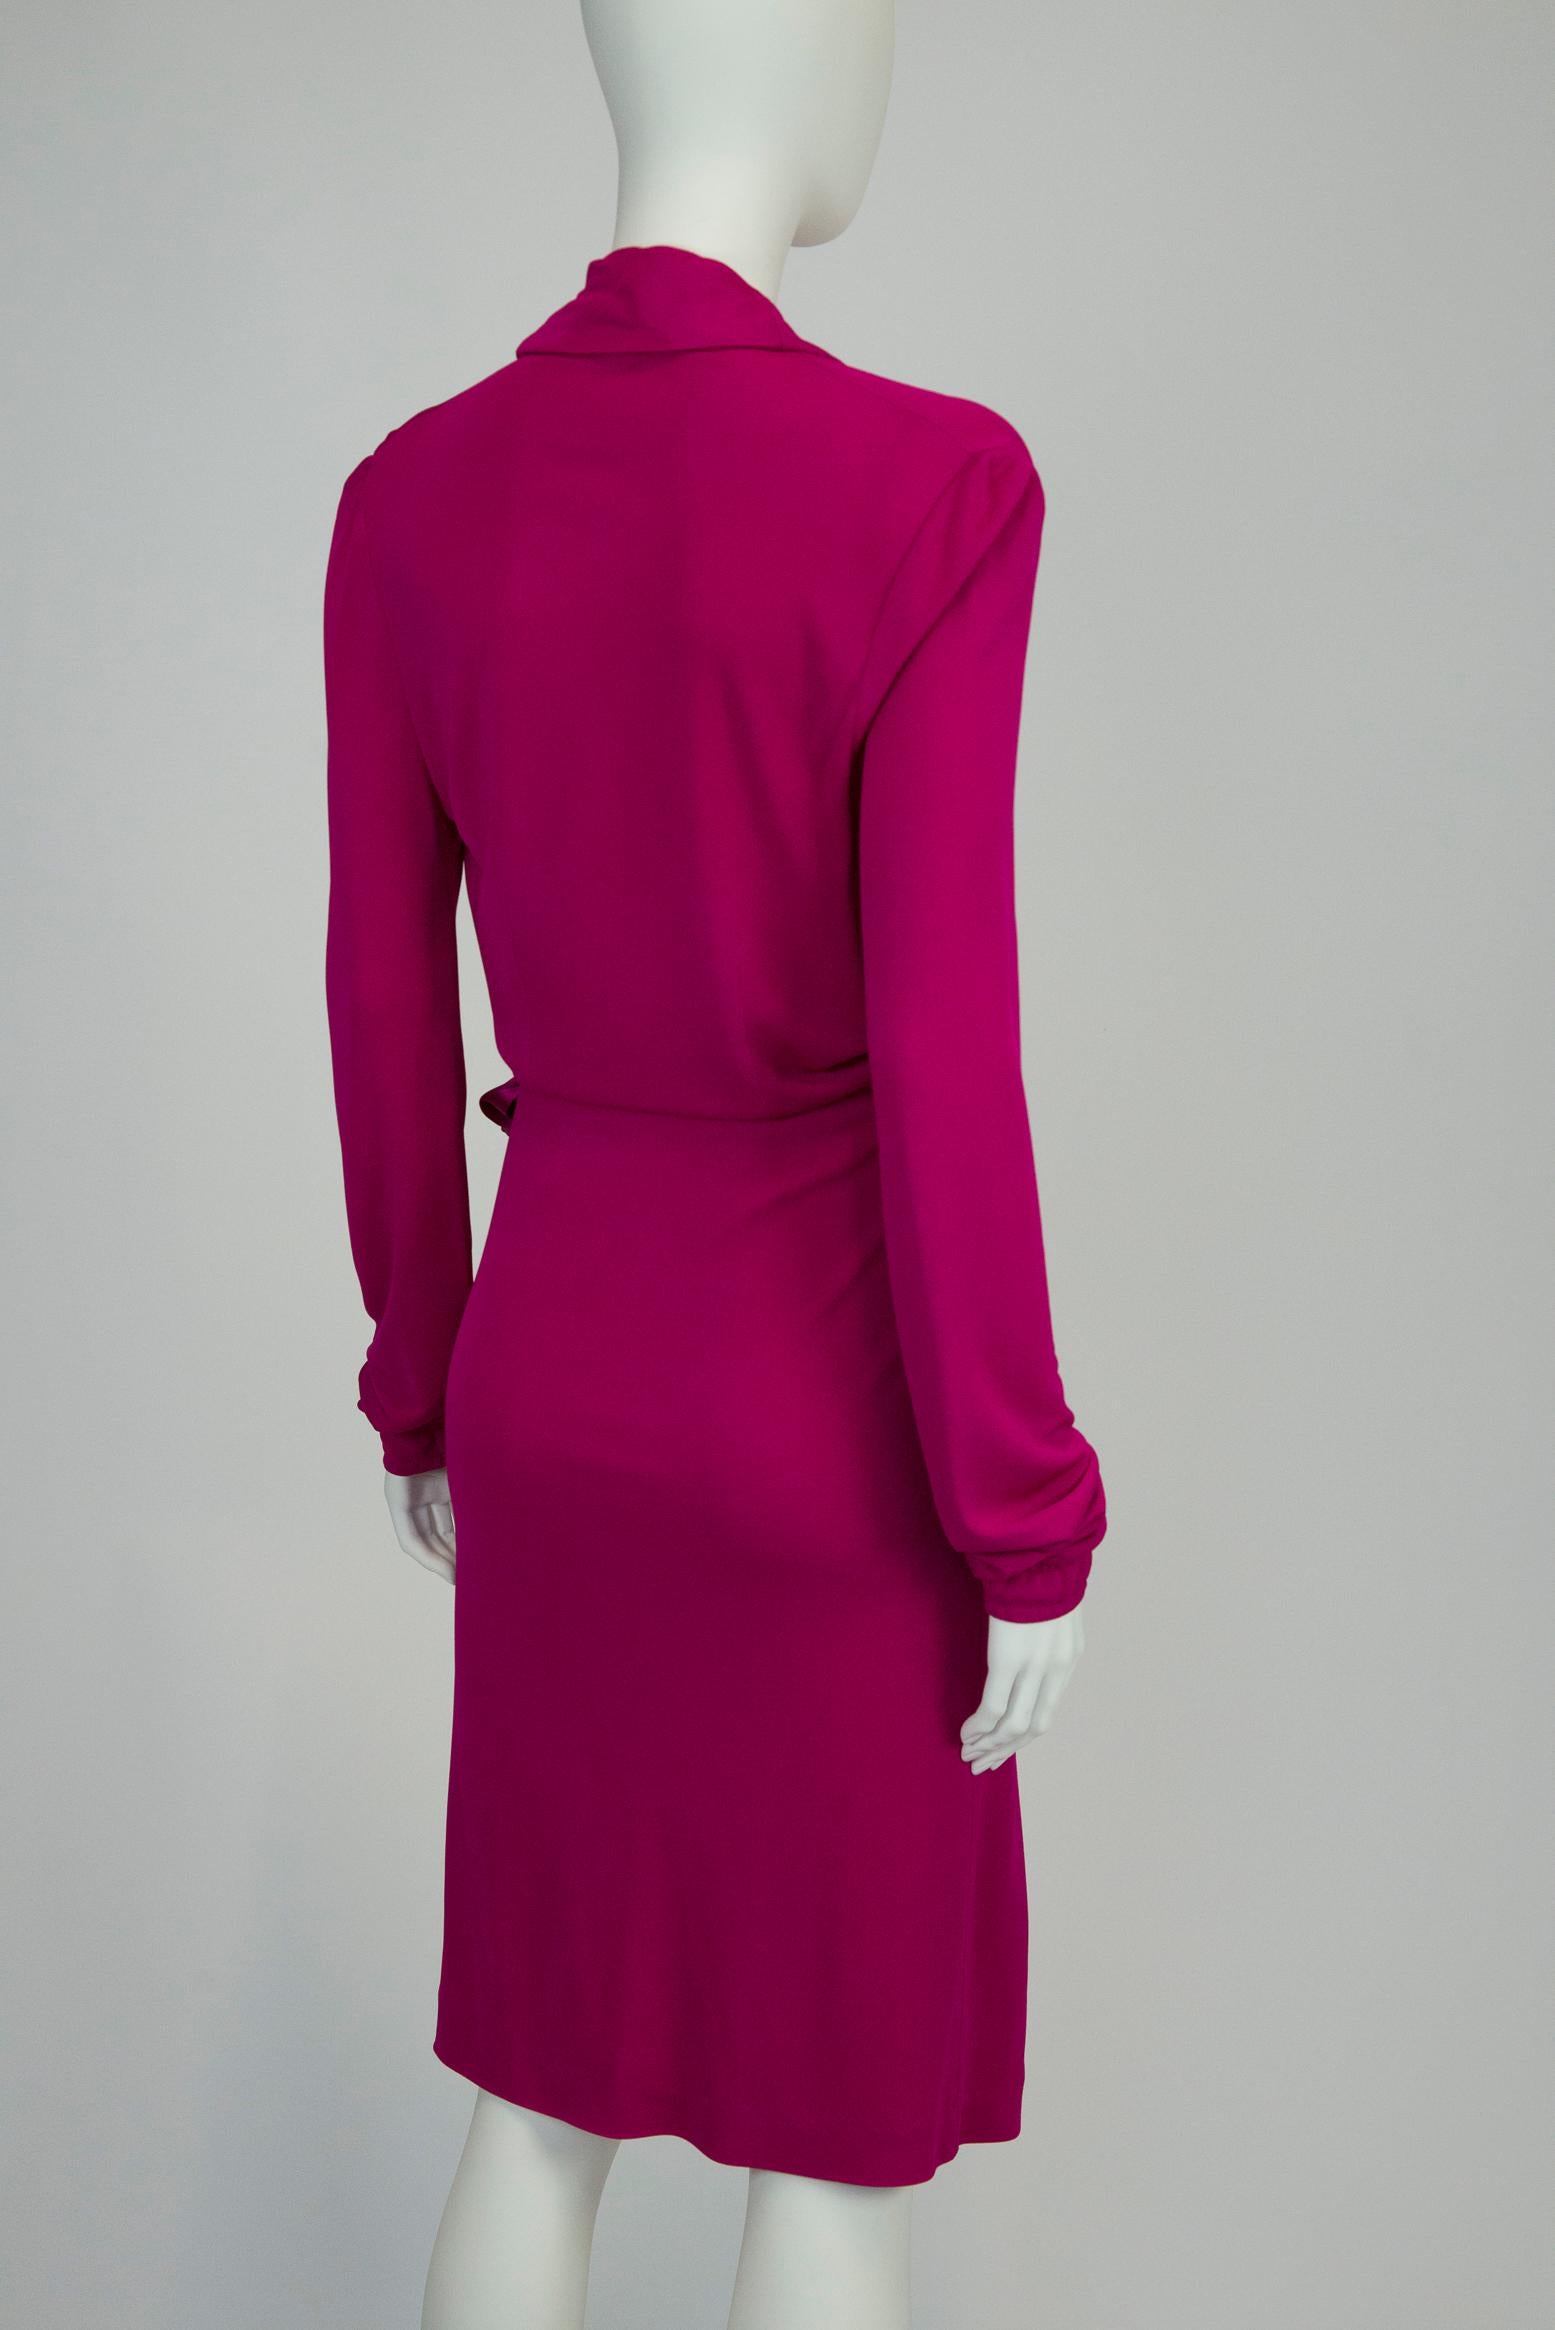 Yves Saint Laurent By Tom Ford Wrap Dress For Sale 8